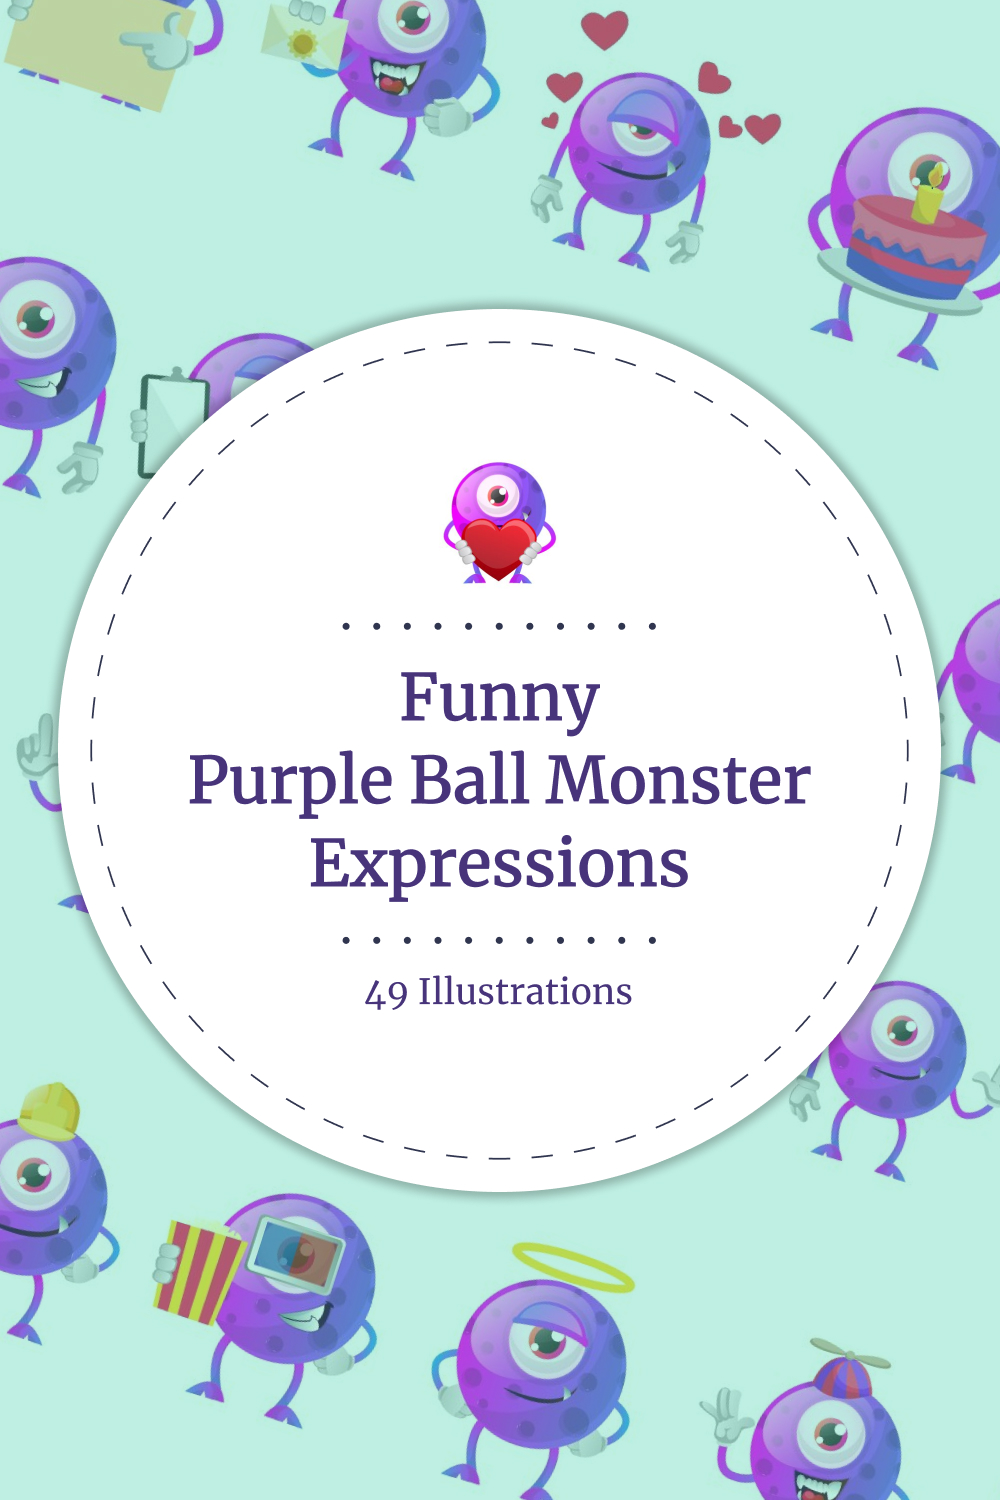 49x funny purple ball monster expressions illustrations 02 57